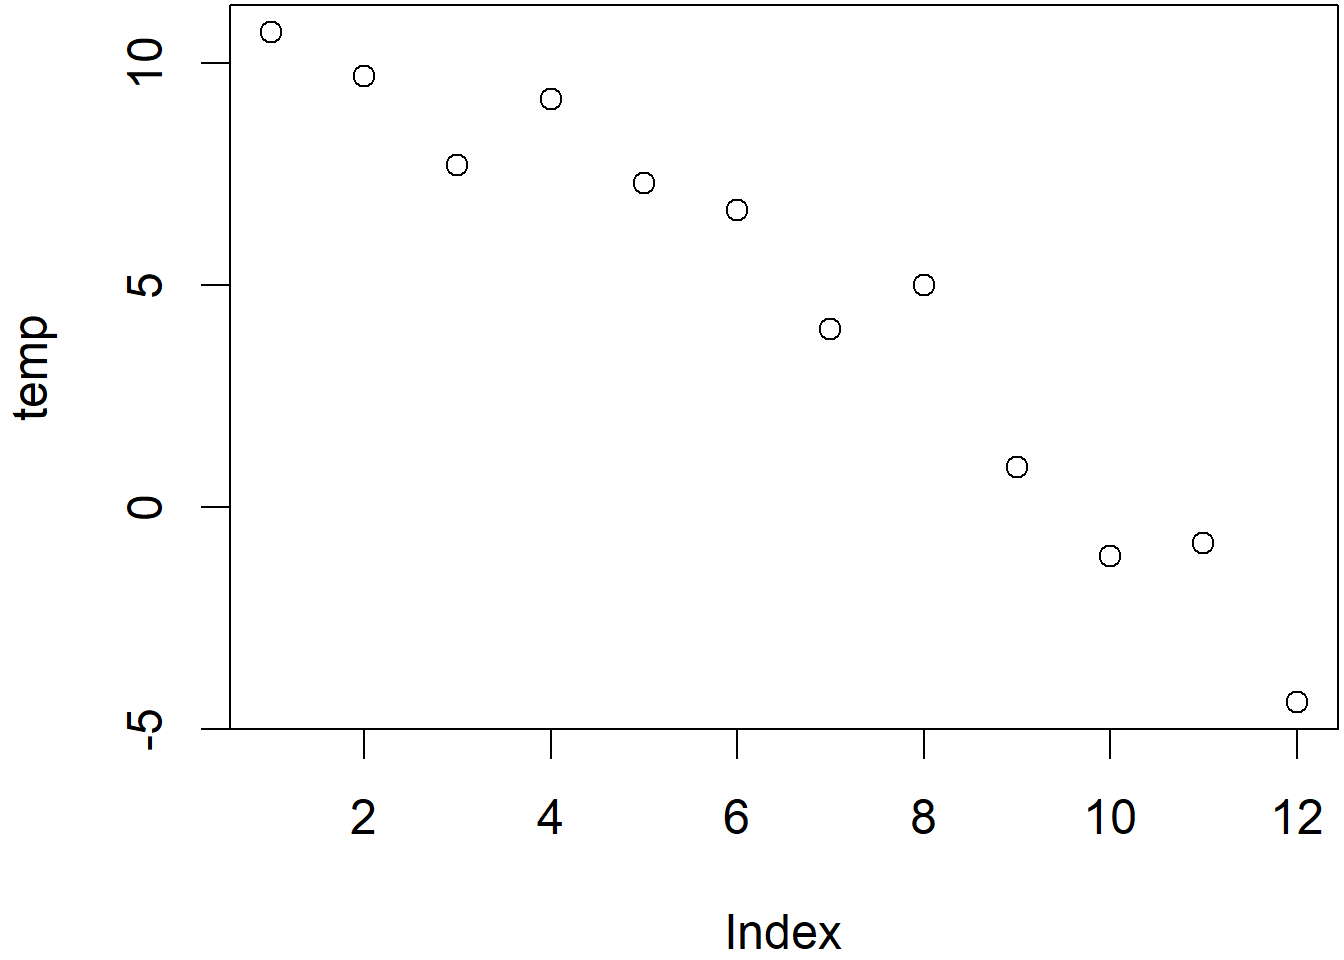 Temperature plotted by index (left) and elevation (right)